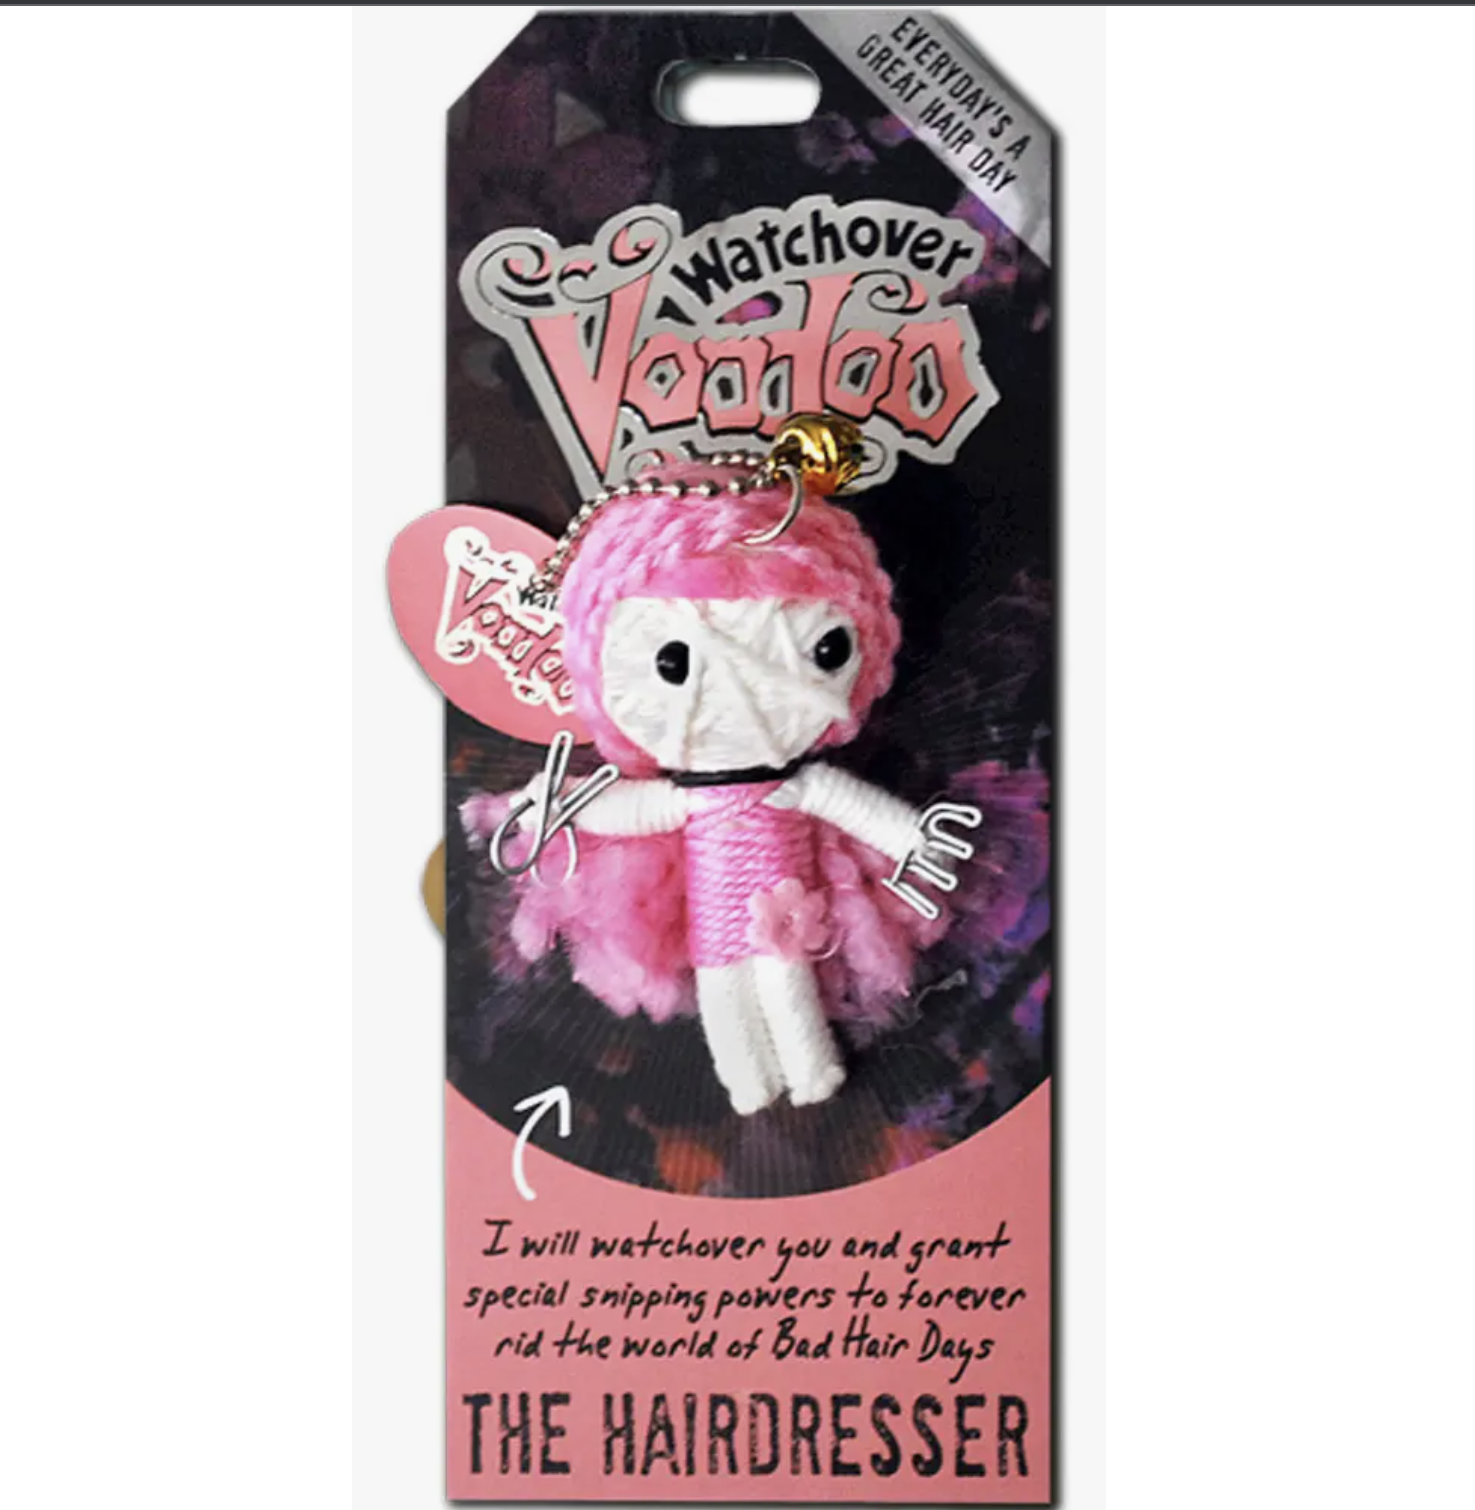 The Hairdresser Voodoo Doll